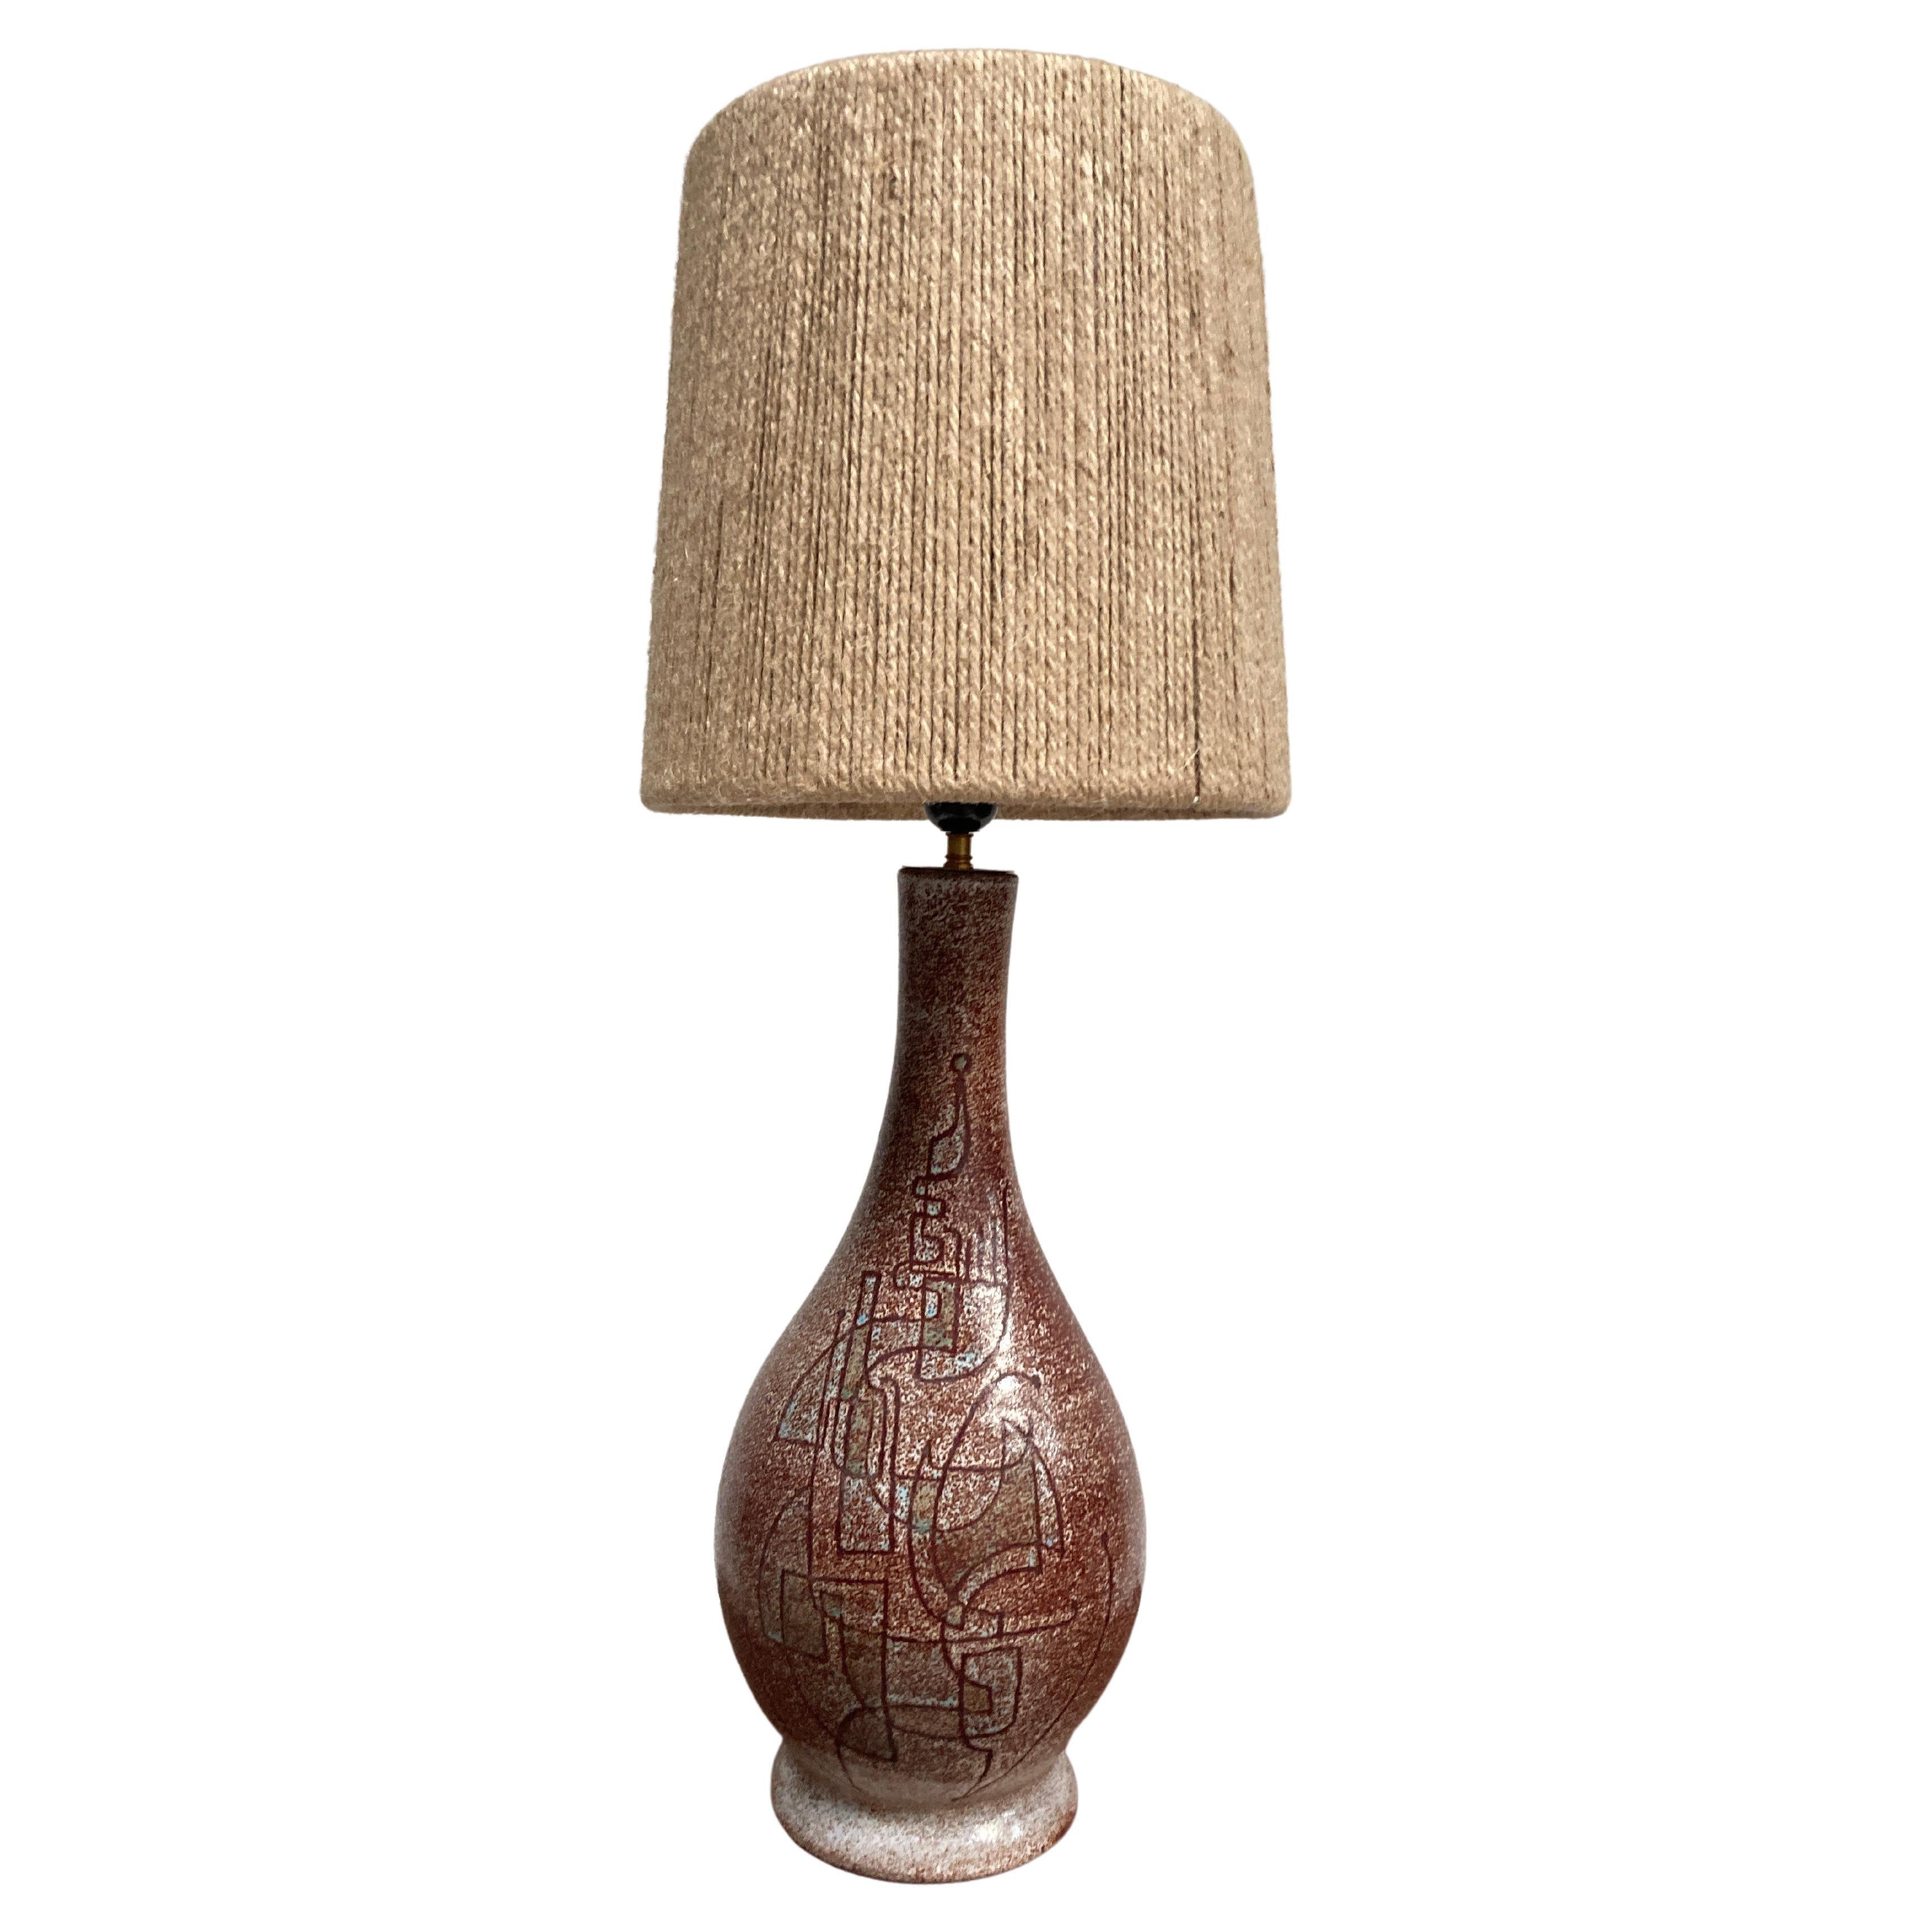 1950's Studio pottery ceramic lamp by Accolay